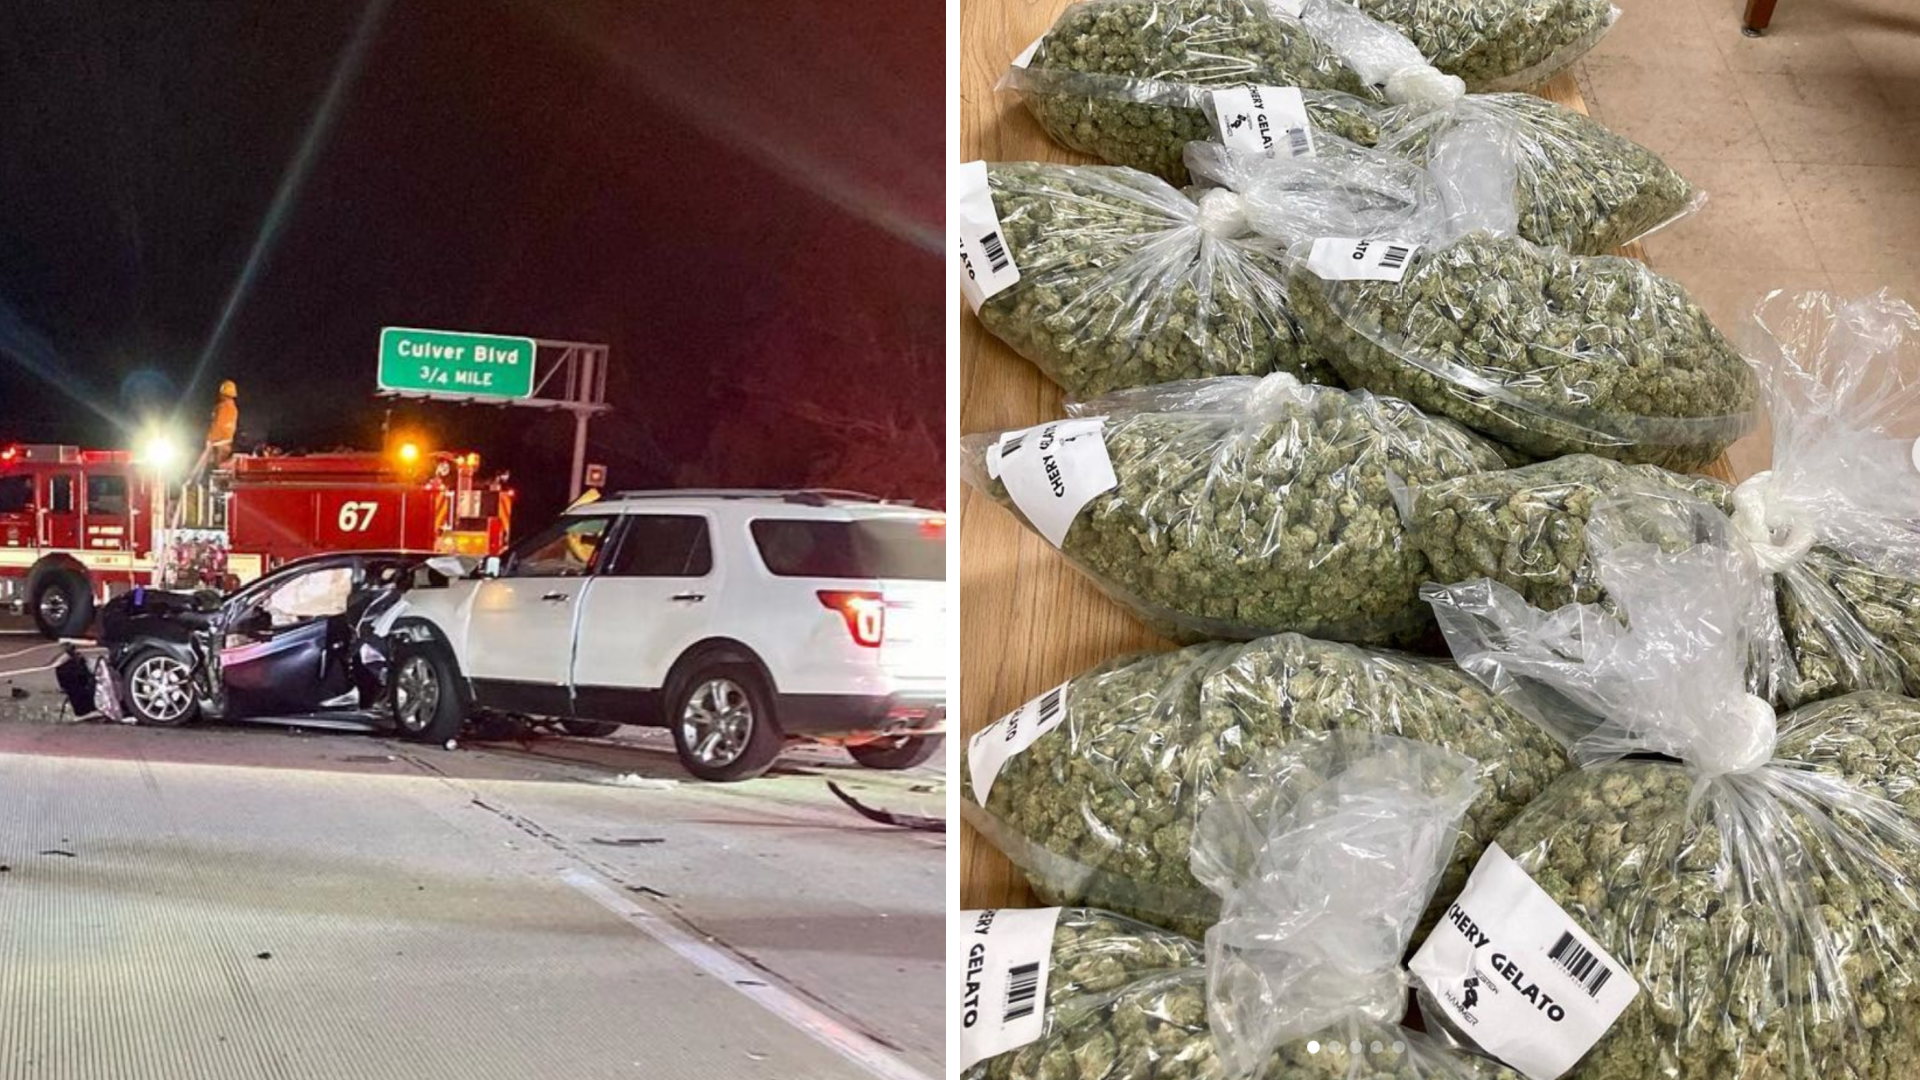 California Highway Patrol on Sept. 30, 2021, released these images after 37 pounds worth of Marijuana were discovered following a crash on the 90 Freeway in Playa del Rey. (chpwestala)